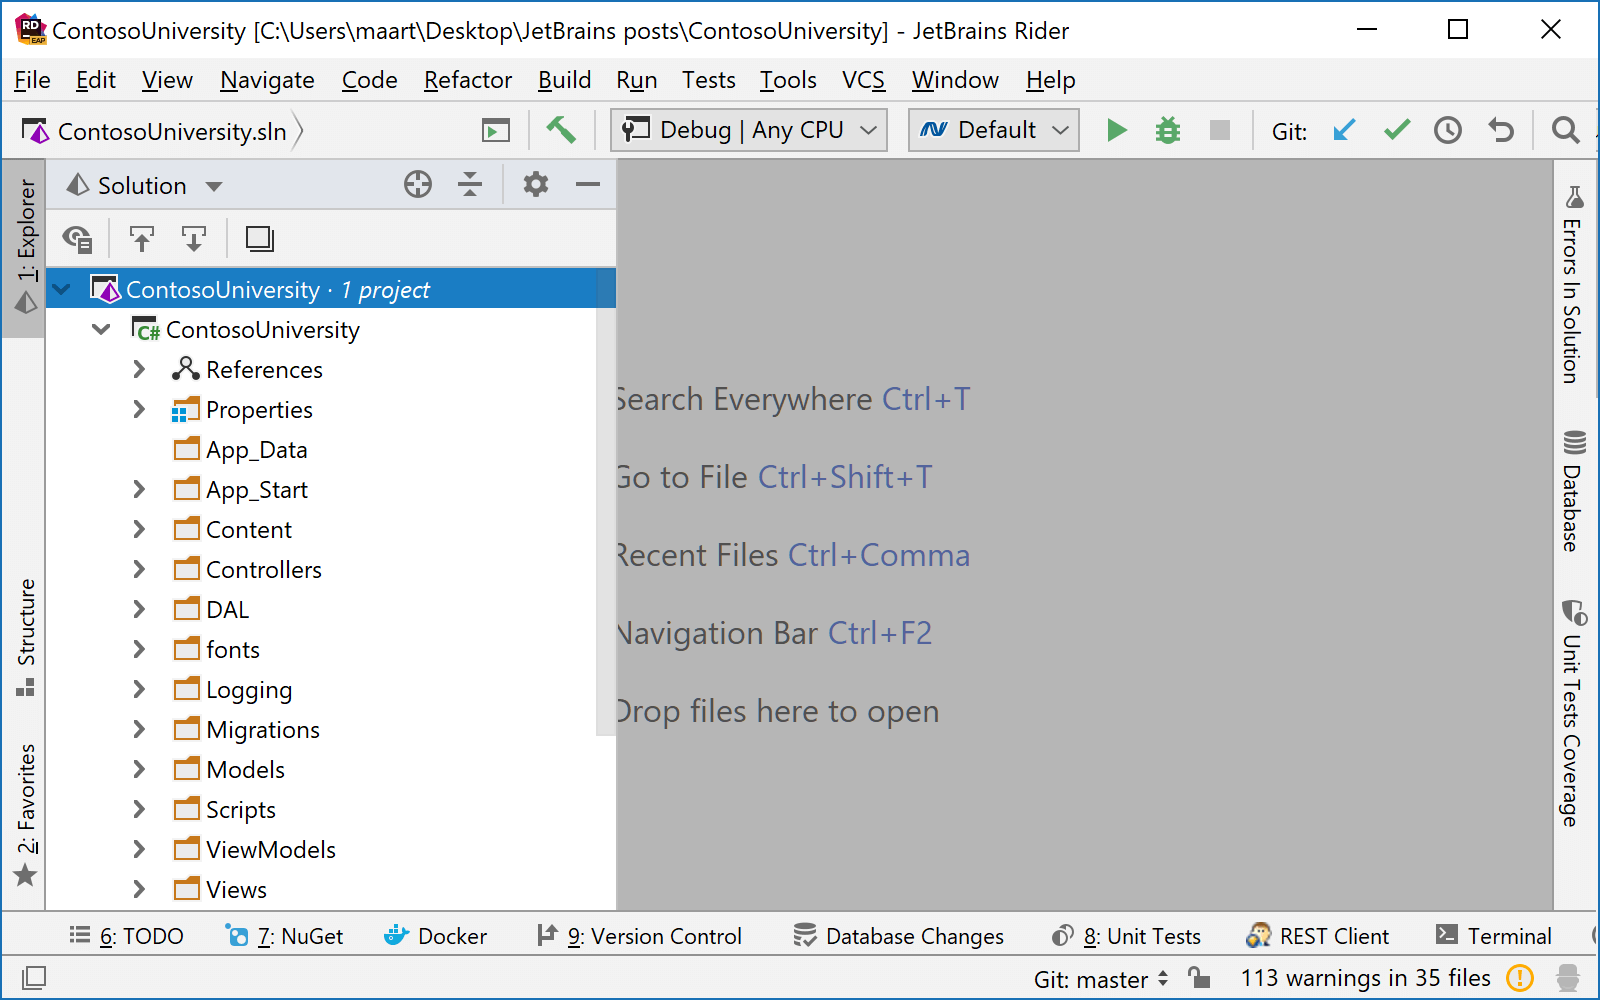 Search Everywhere to decompile source code